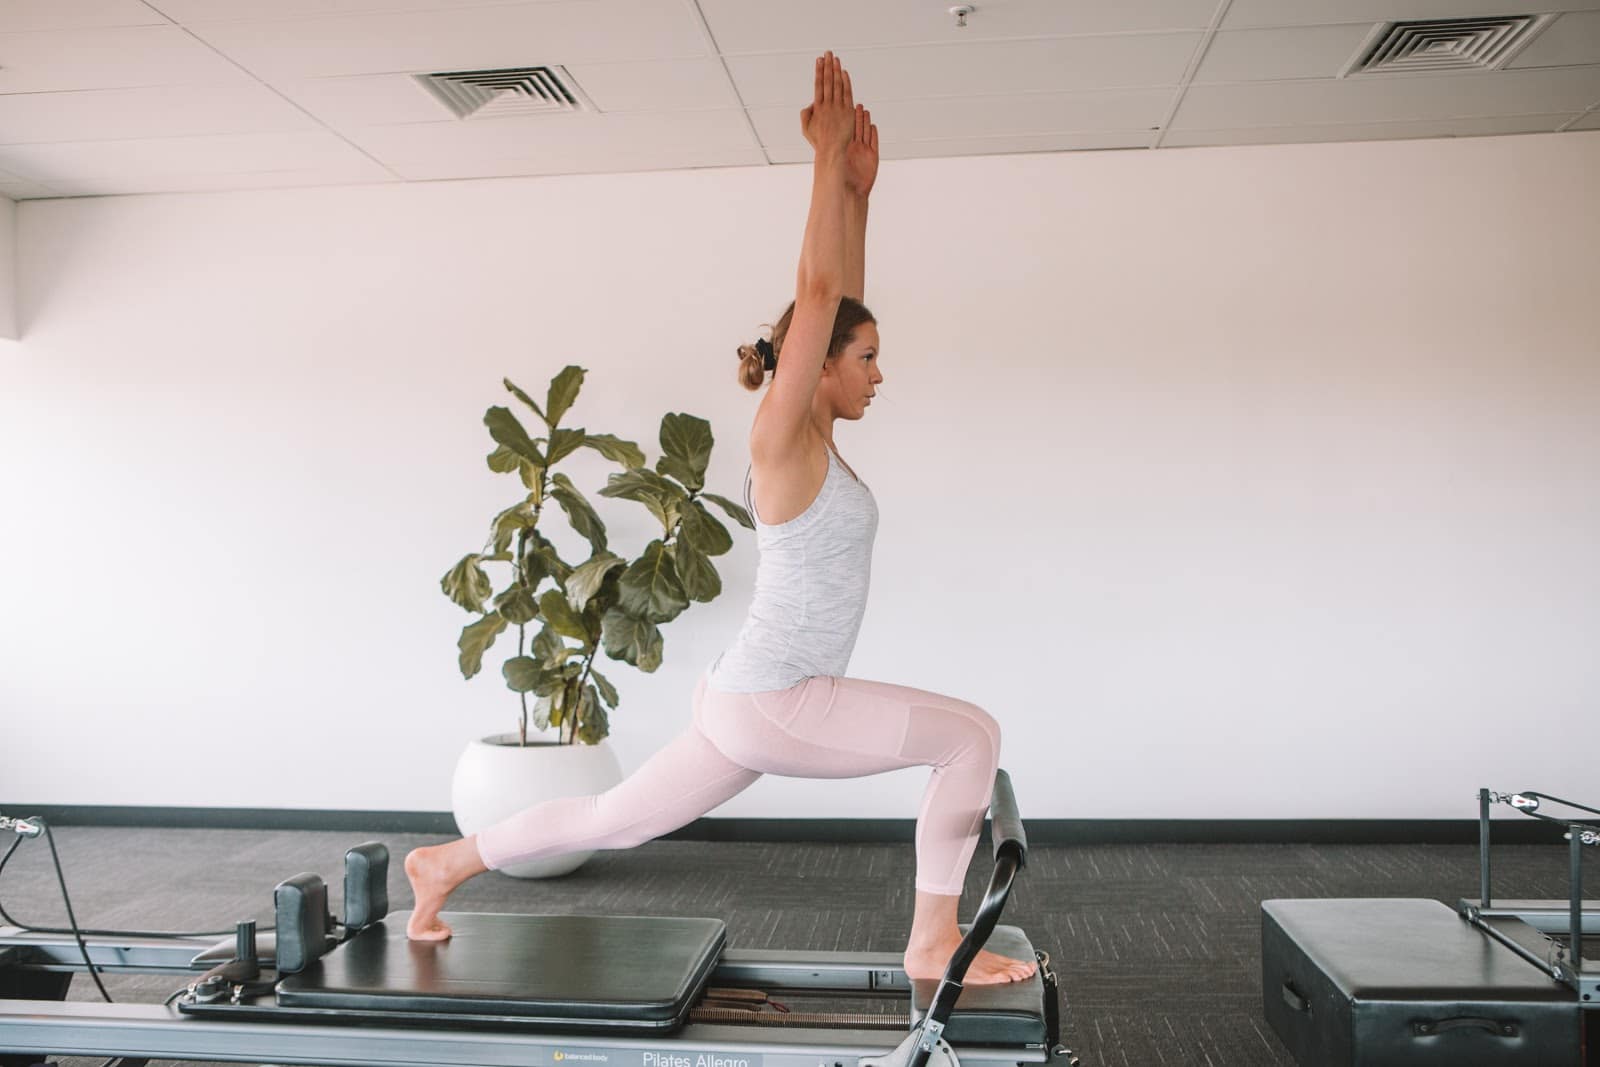 9 Pilates Promotion Ideas That Win Customers